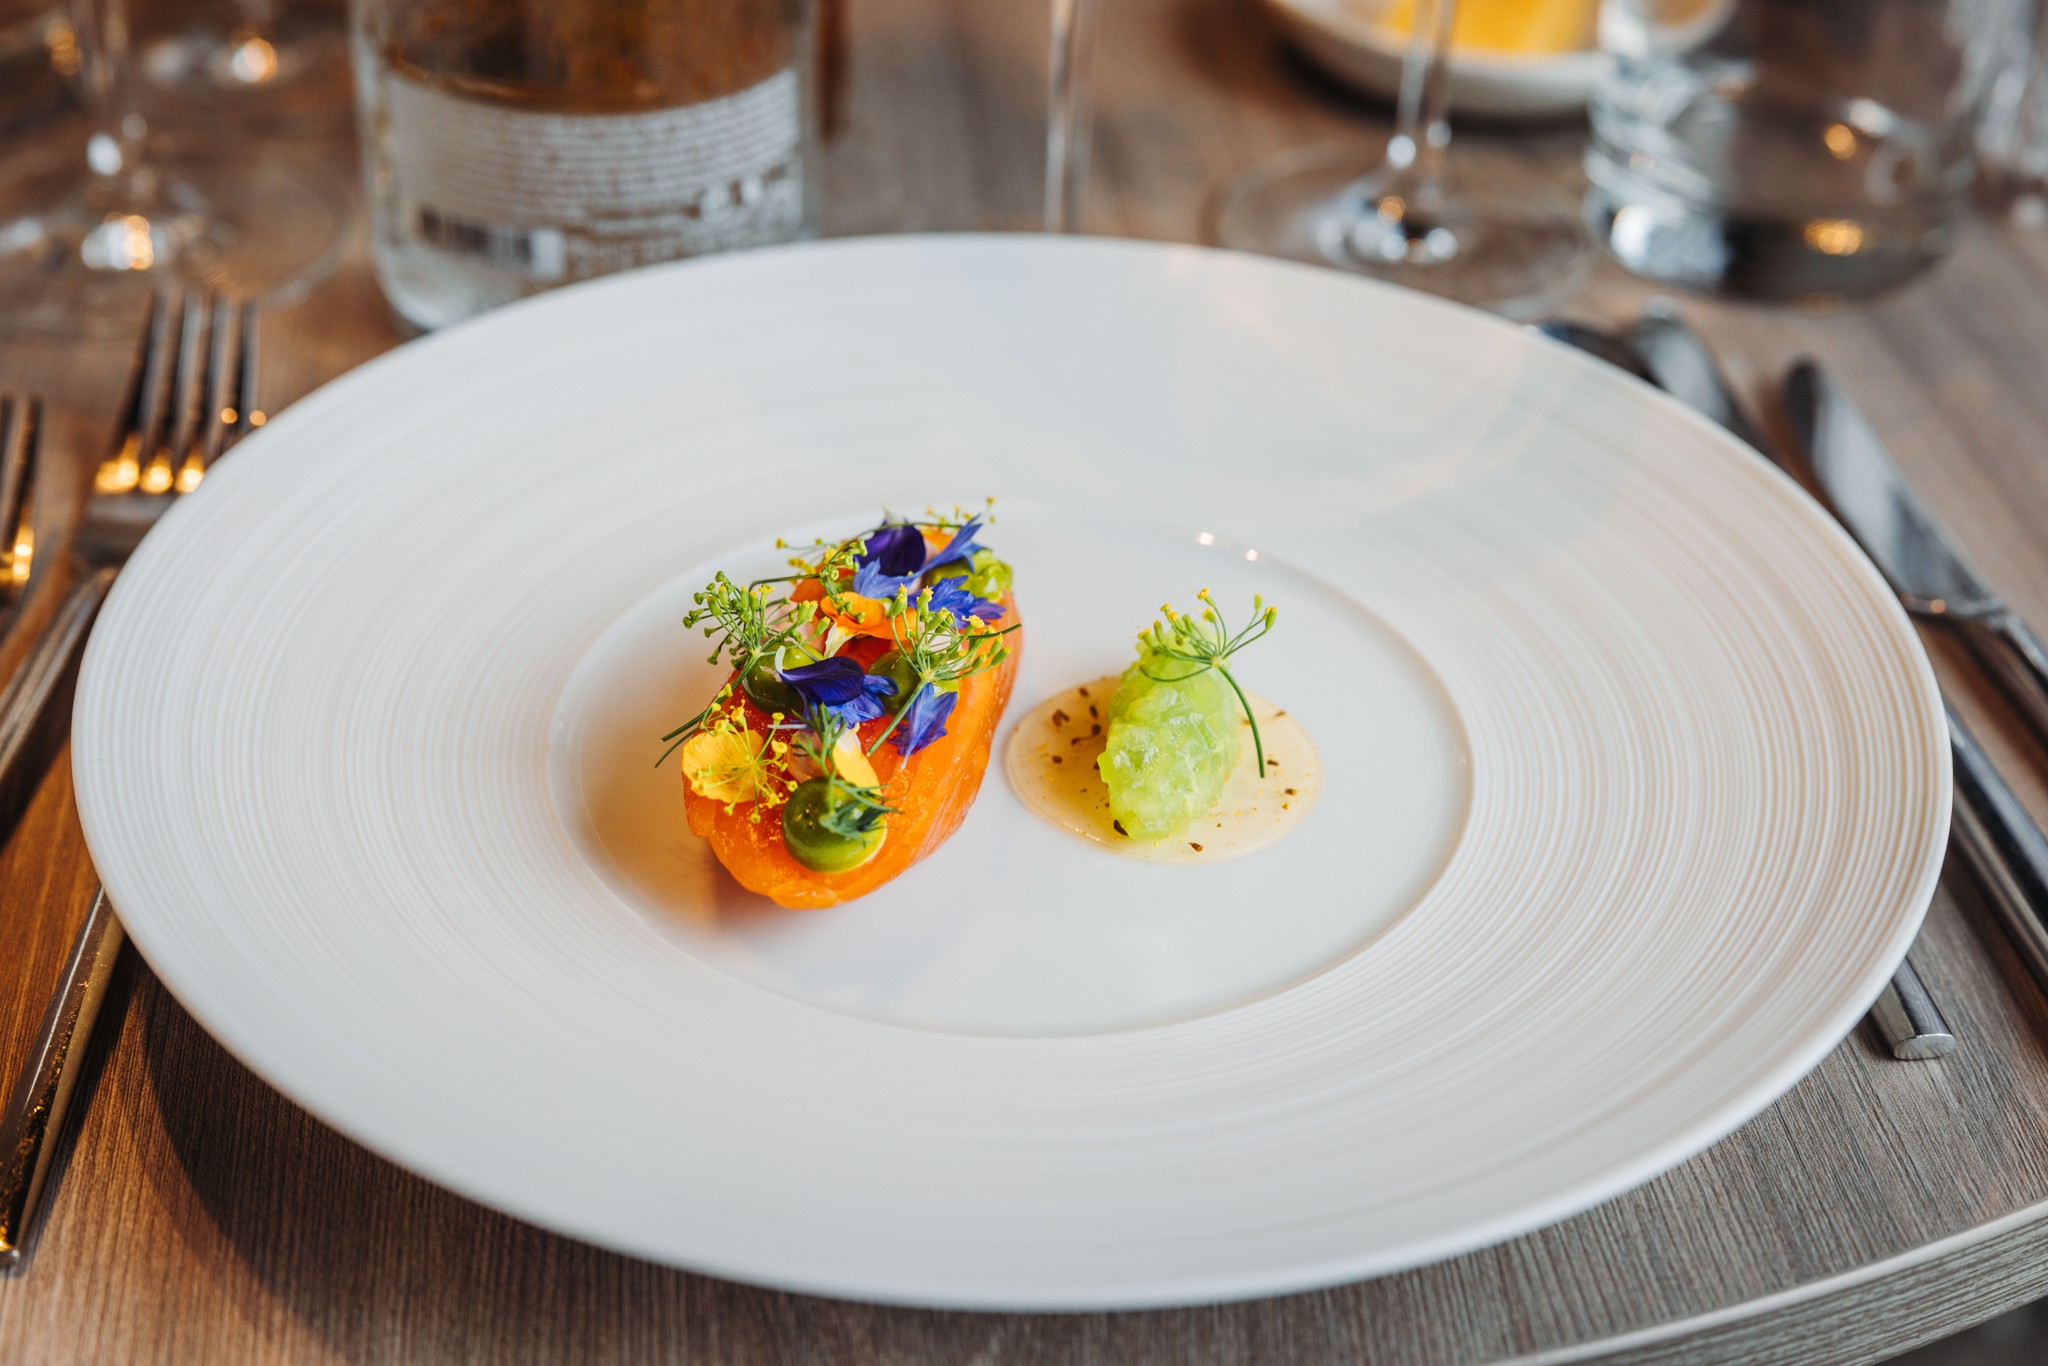 Chalk Stream trout dish from Marcus Wareing at Rosewater Pavilion at the 2023 Wimbledon Championships